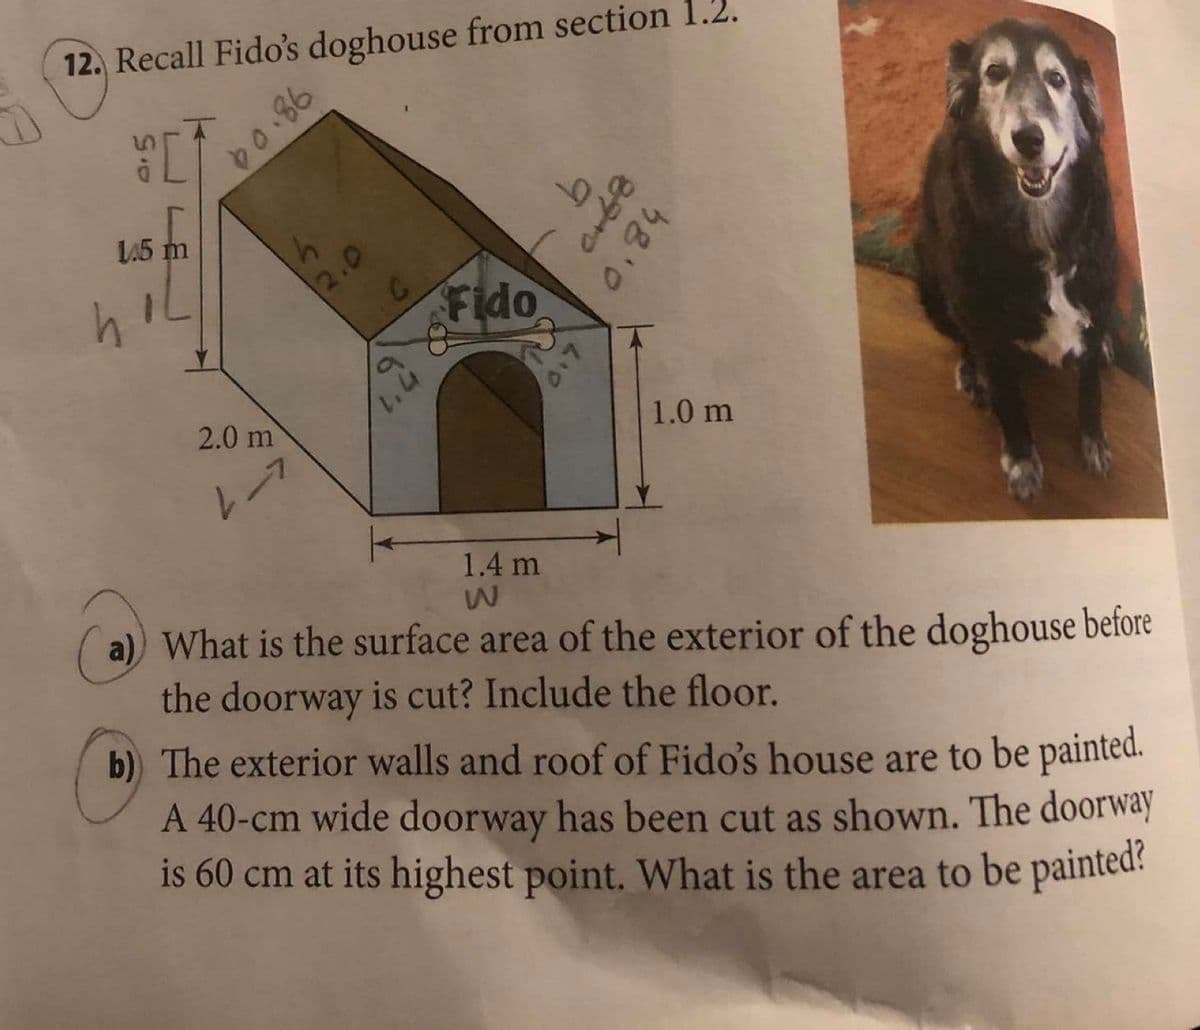 12. Recall Fido's doghouse from section 1.2.
L45 m
2.0
Fido
2.0 m
1.0 m
1.4 m
What is the surface area of the exterior of the doghouse before
the doorway is cut? Include the floor.
b) The exterior walls and roof of Fido's house are to be painted.
A 40-cm wide doorway has been cut as shown. The doorway
is 60 cm at its highest point. What is the area to be painted
D0.86
0.84
0.7
